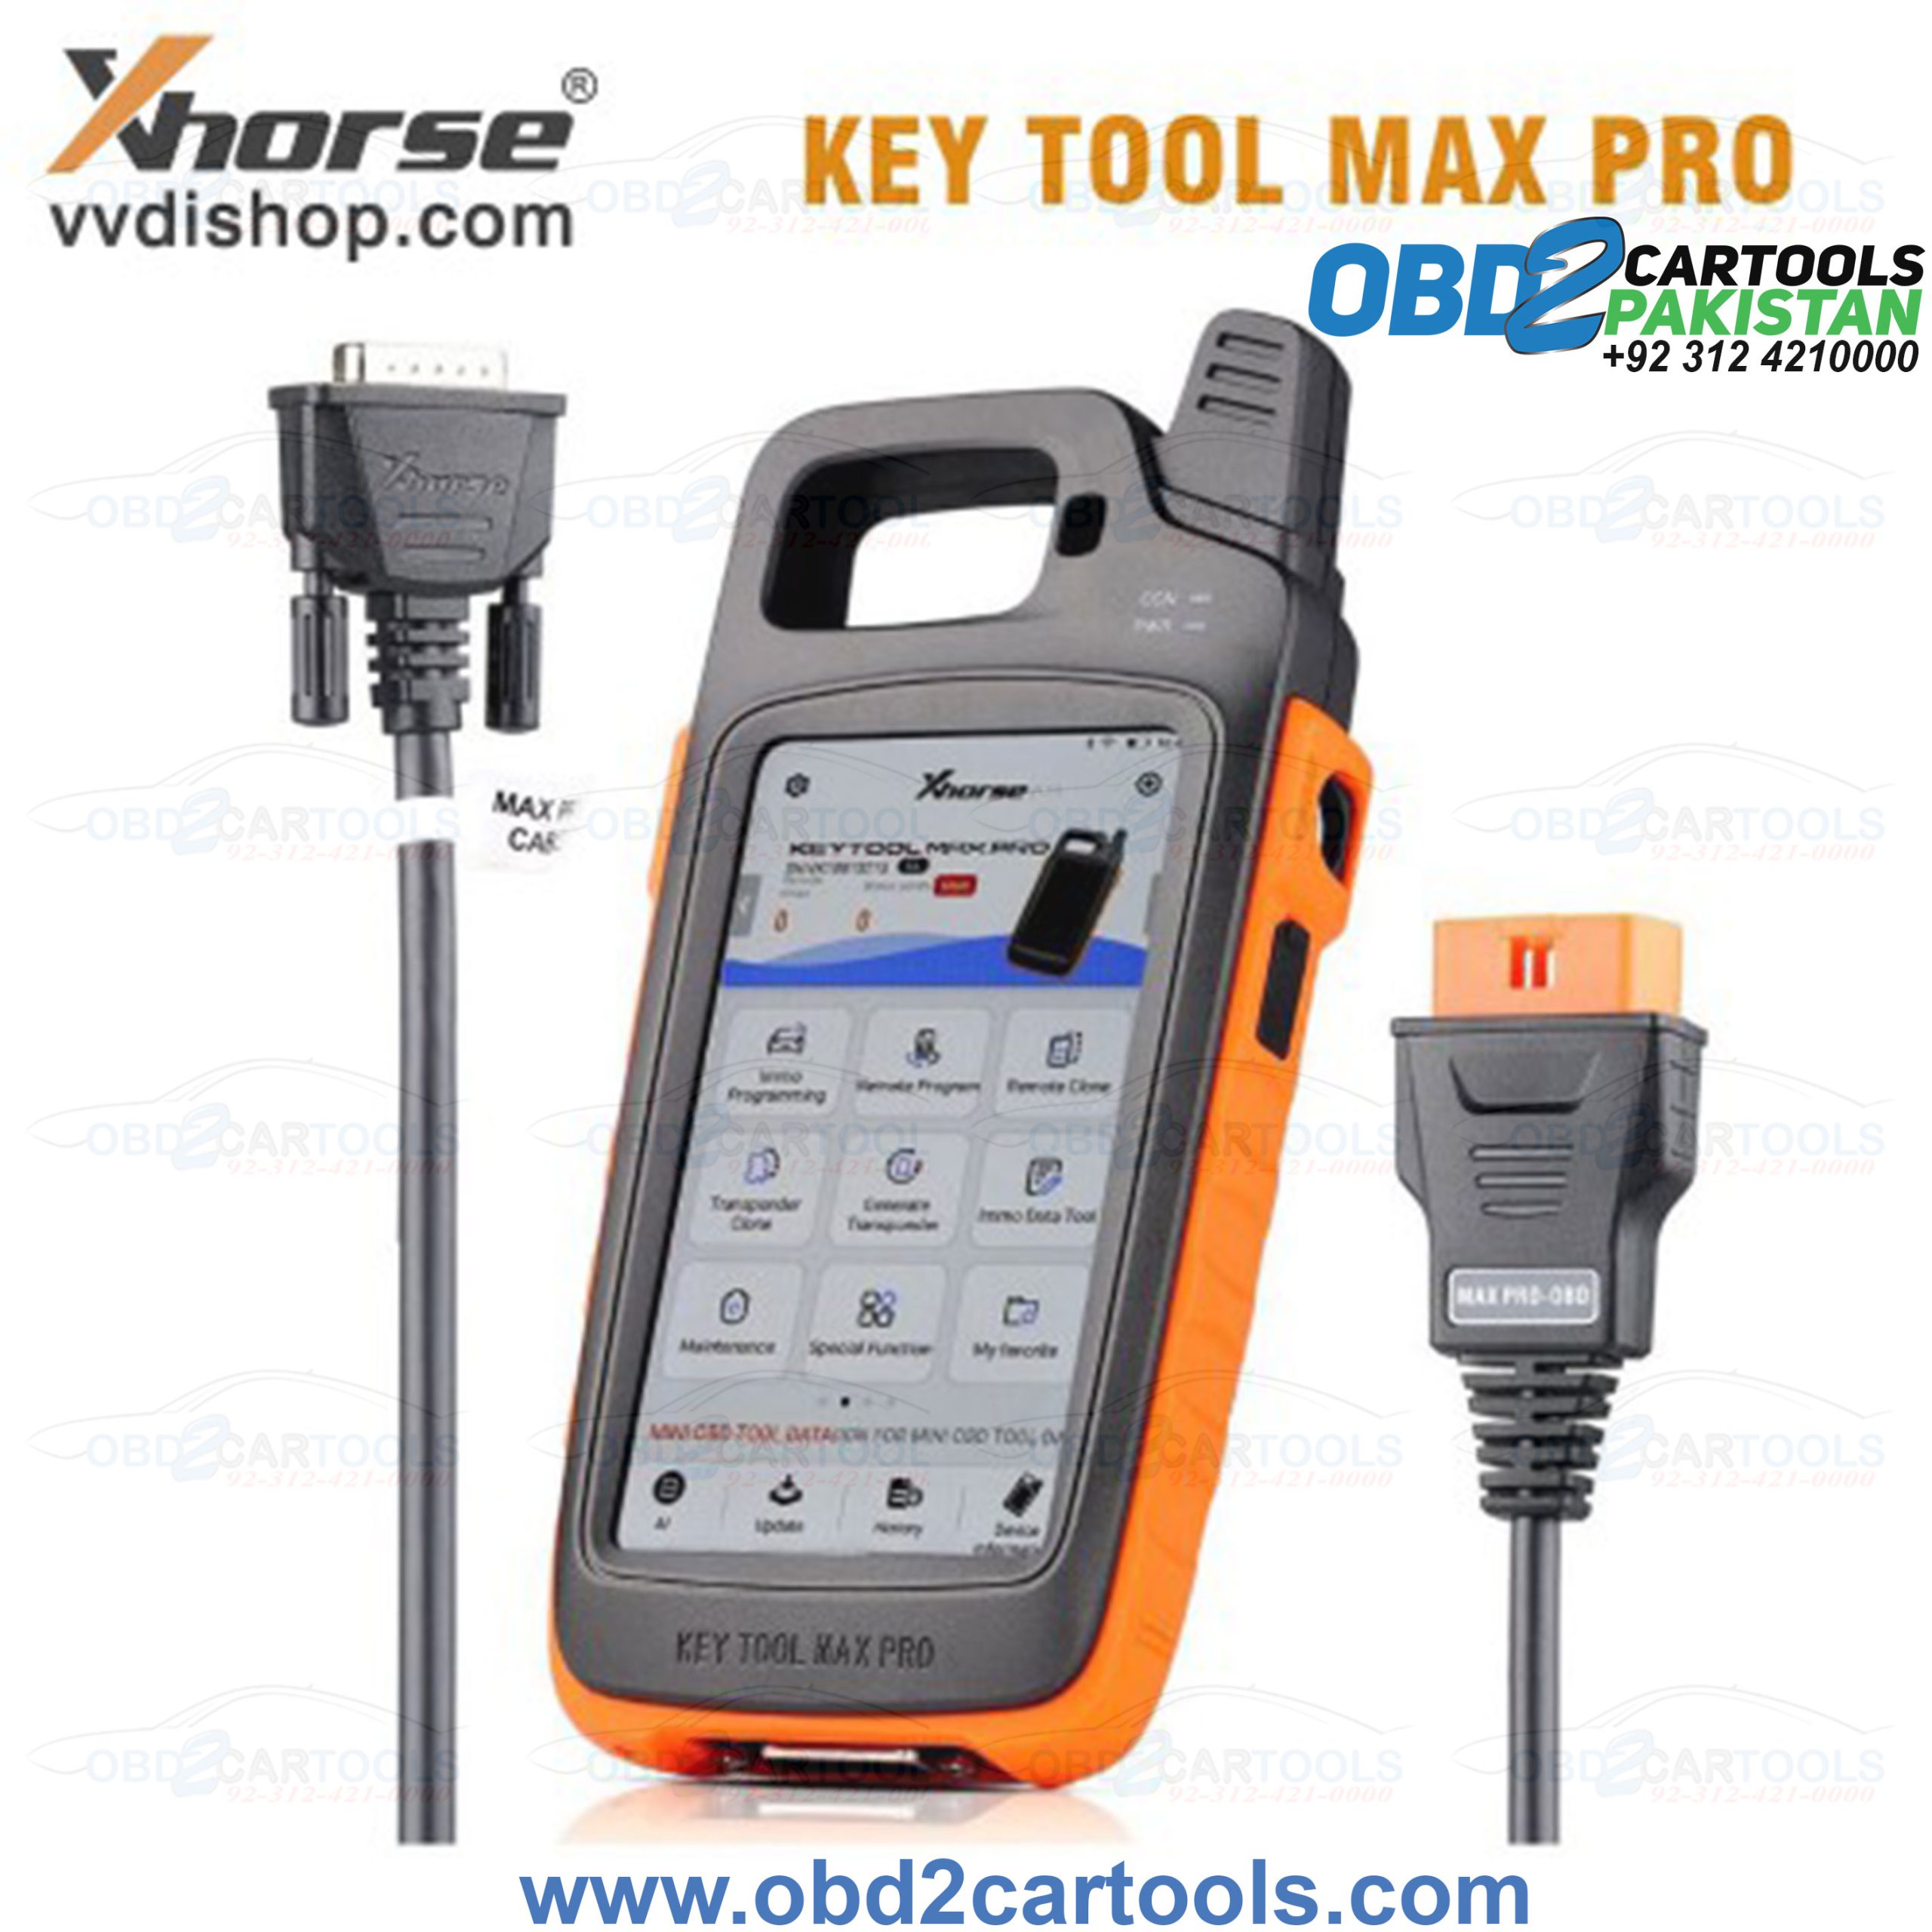 Product image for Xhorse VVDI Key Tool Max Pro Multi-Language Remote Programmer Adds CAN FD, Voltage and Leakage Current Functions